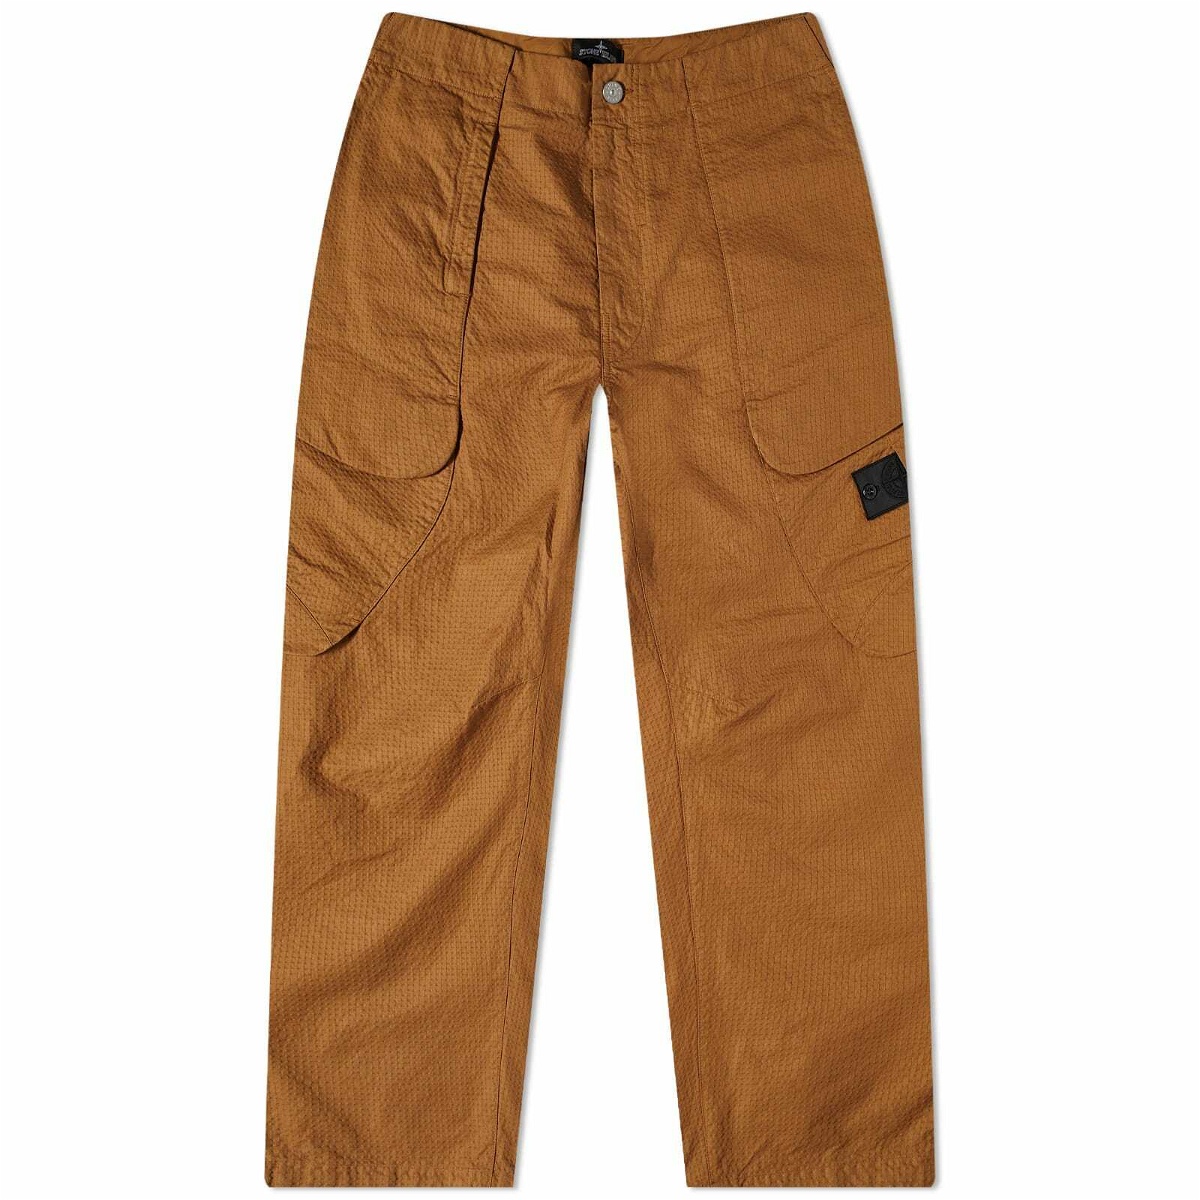 Stone Island Shadow Project Men's Wide Cargo Pant in Tabacco Stone ...